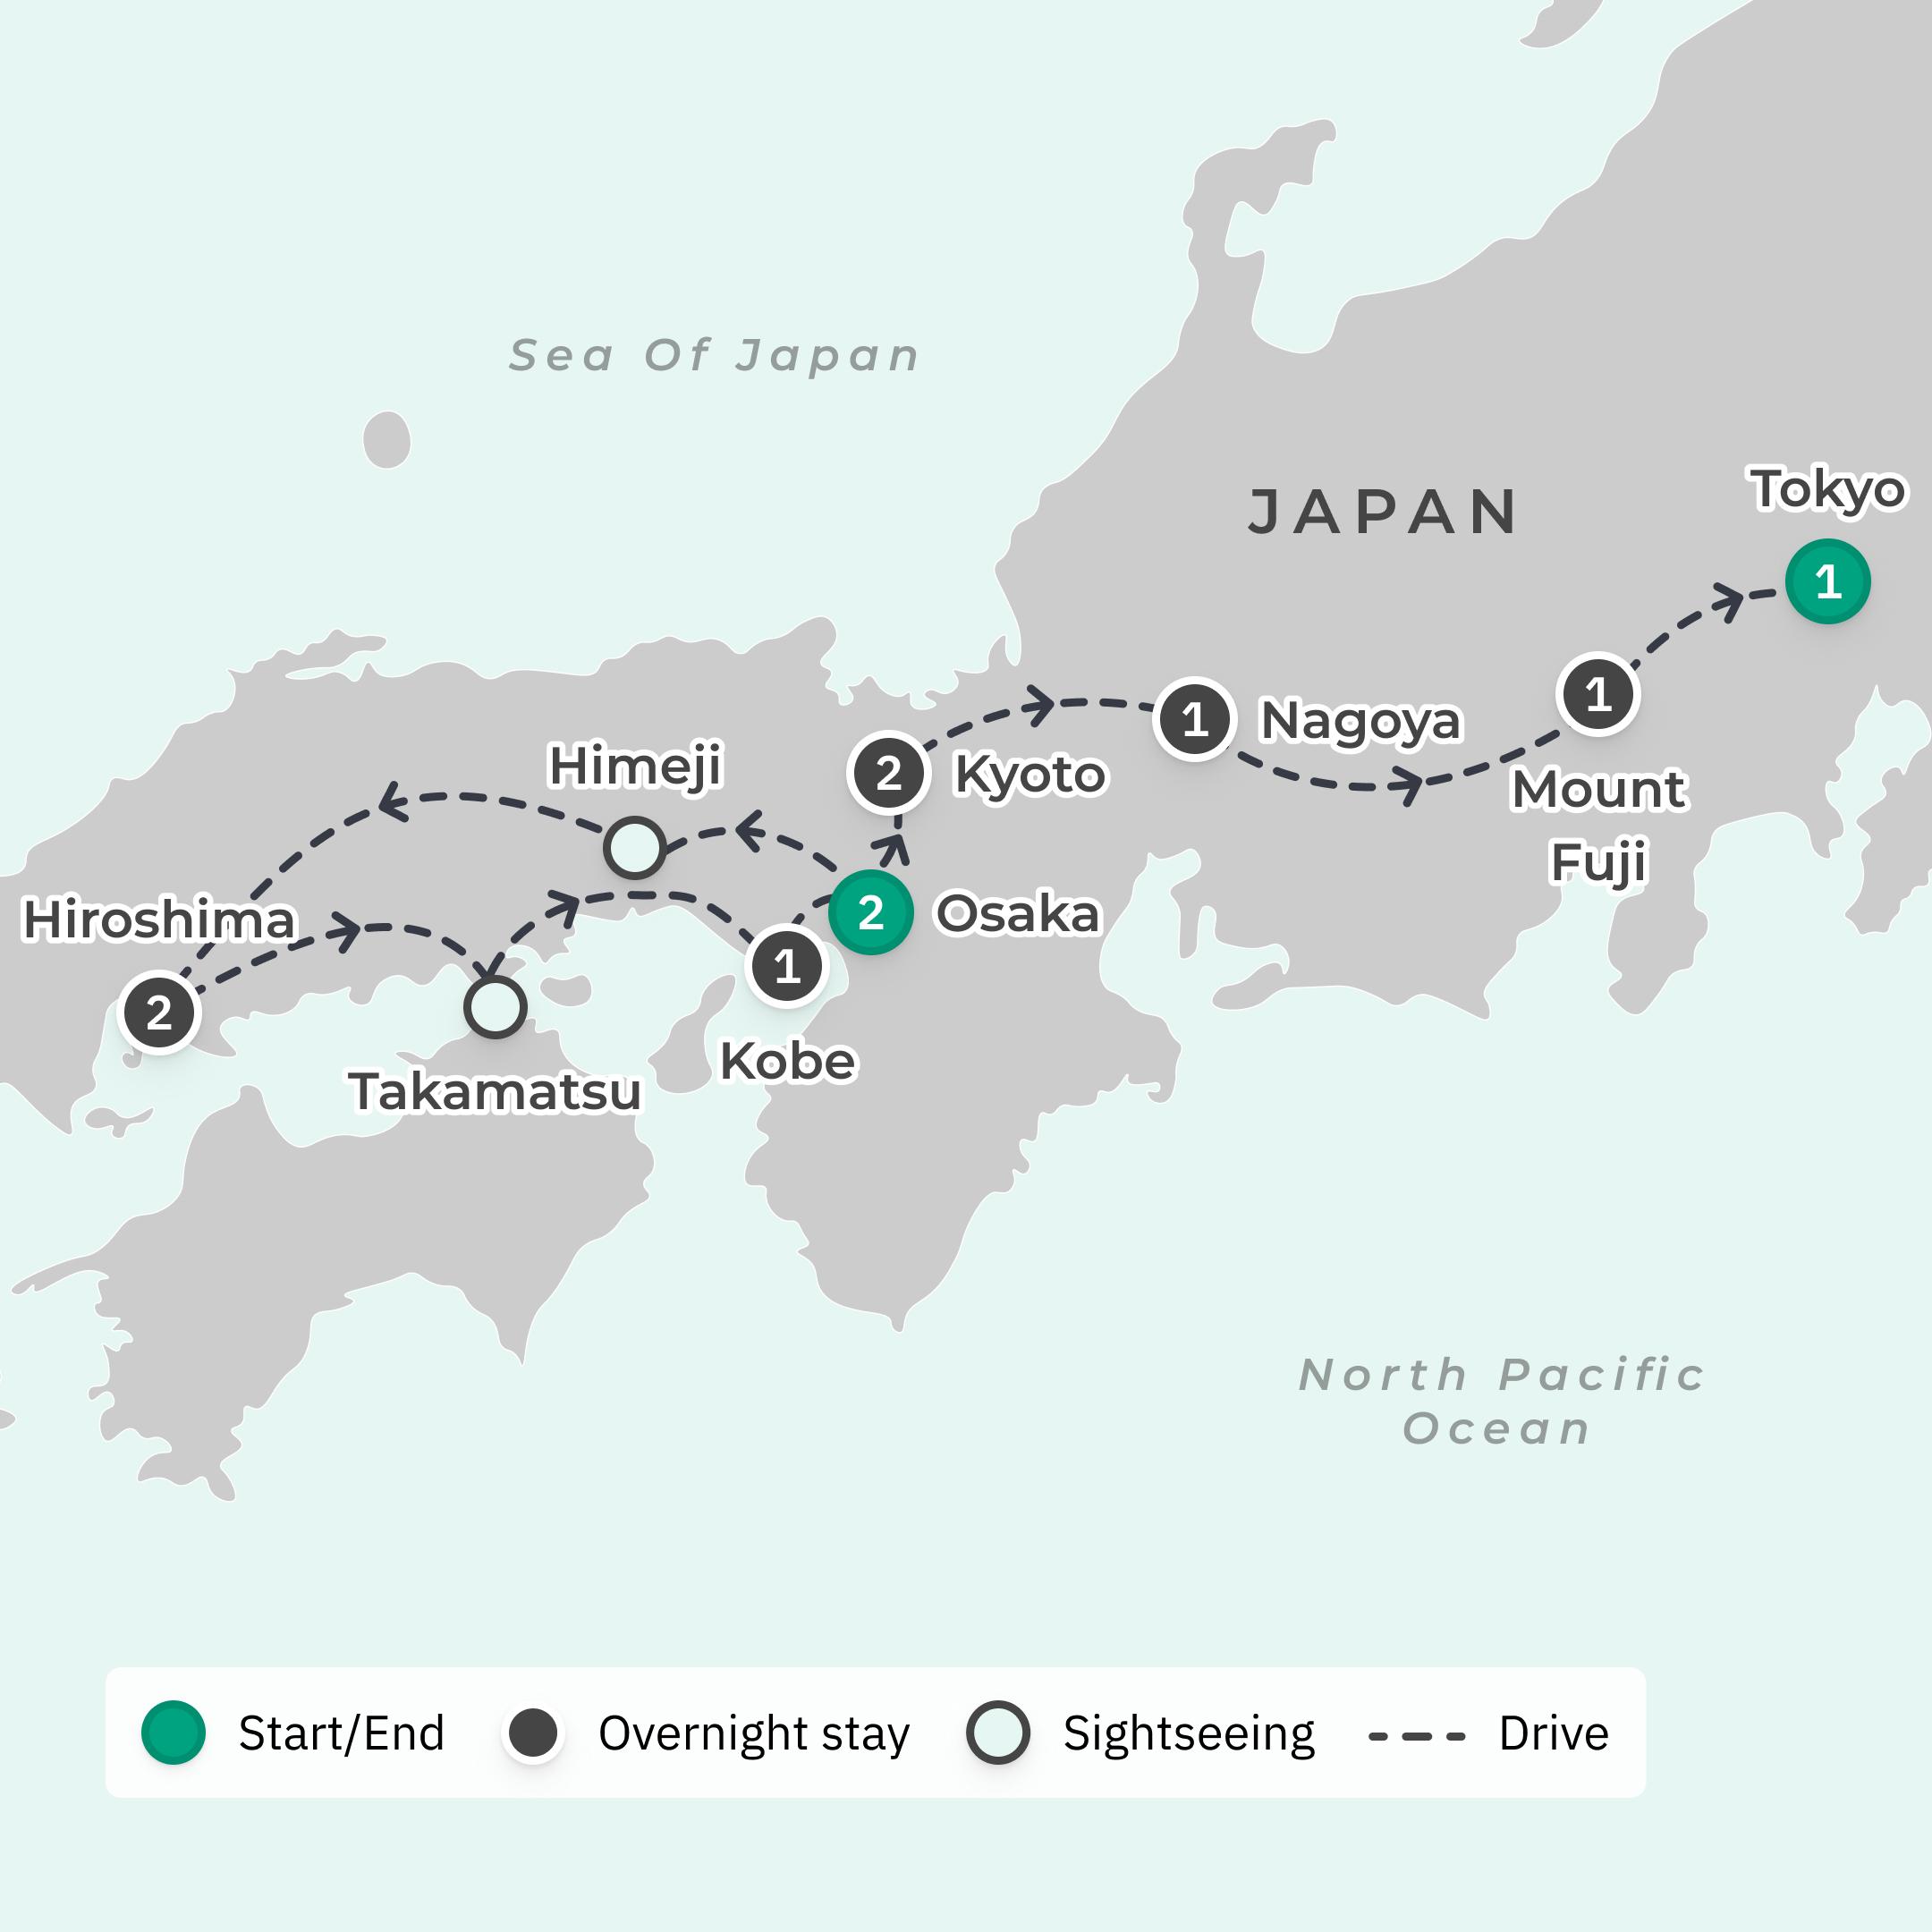 Gourmet Japan with Sake Tasting & Udon Noodle-Making Class route map